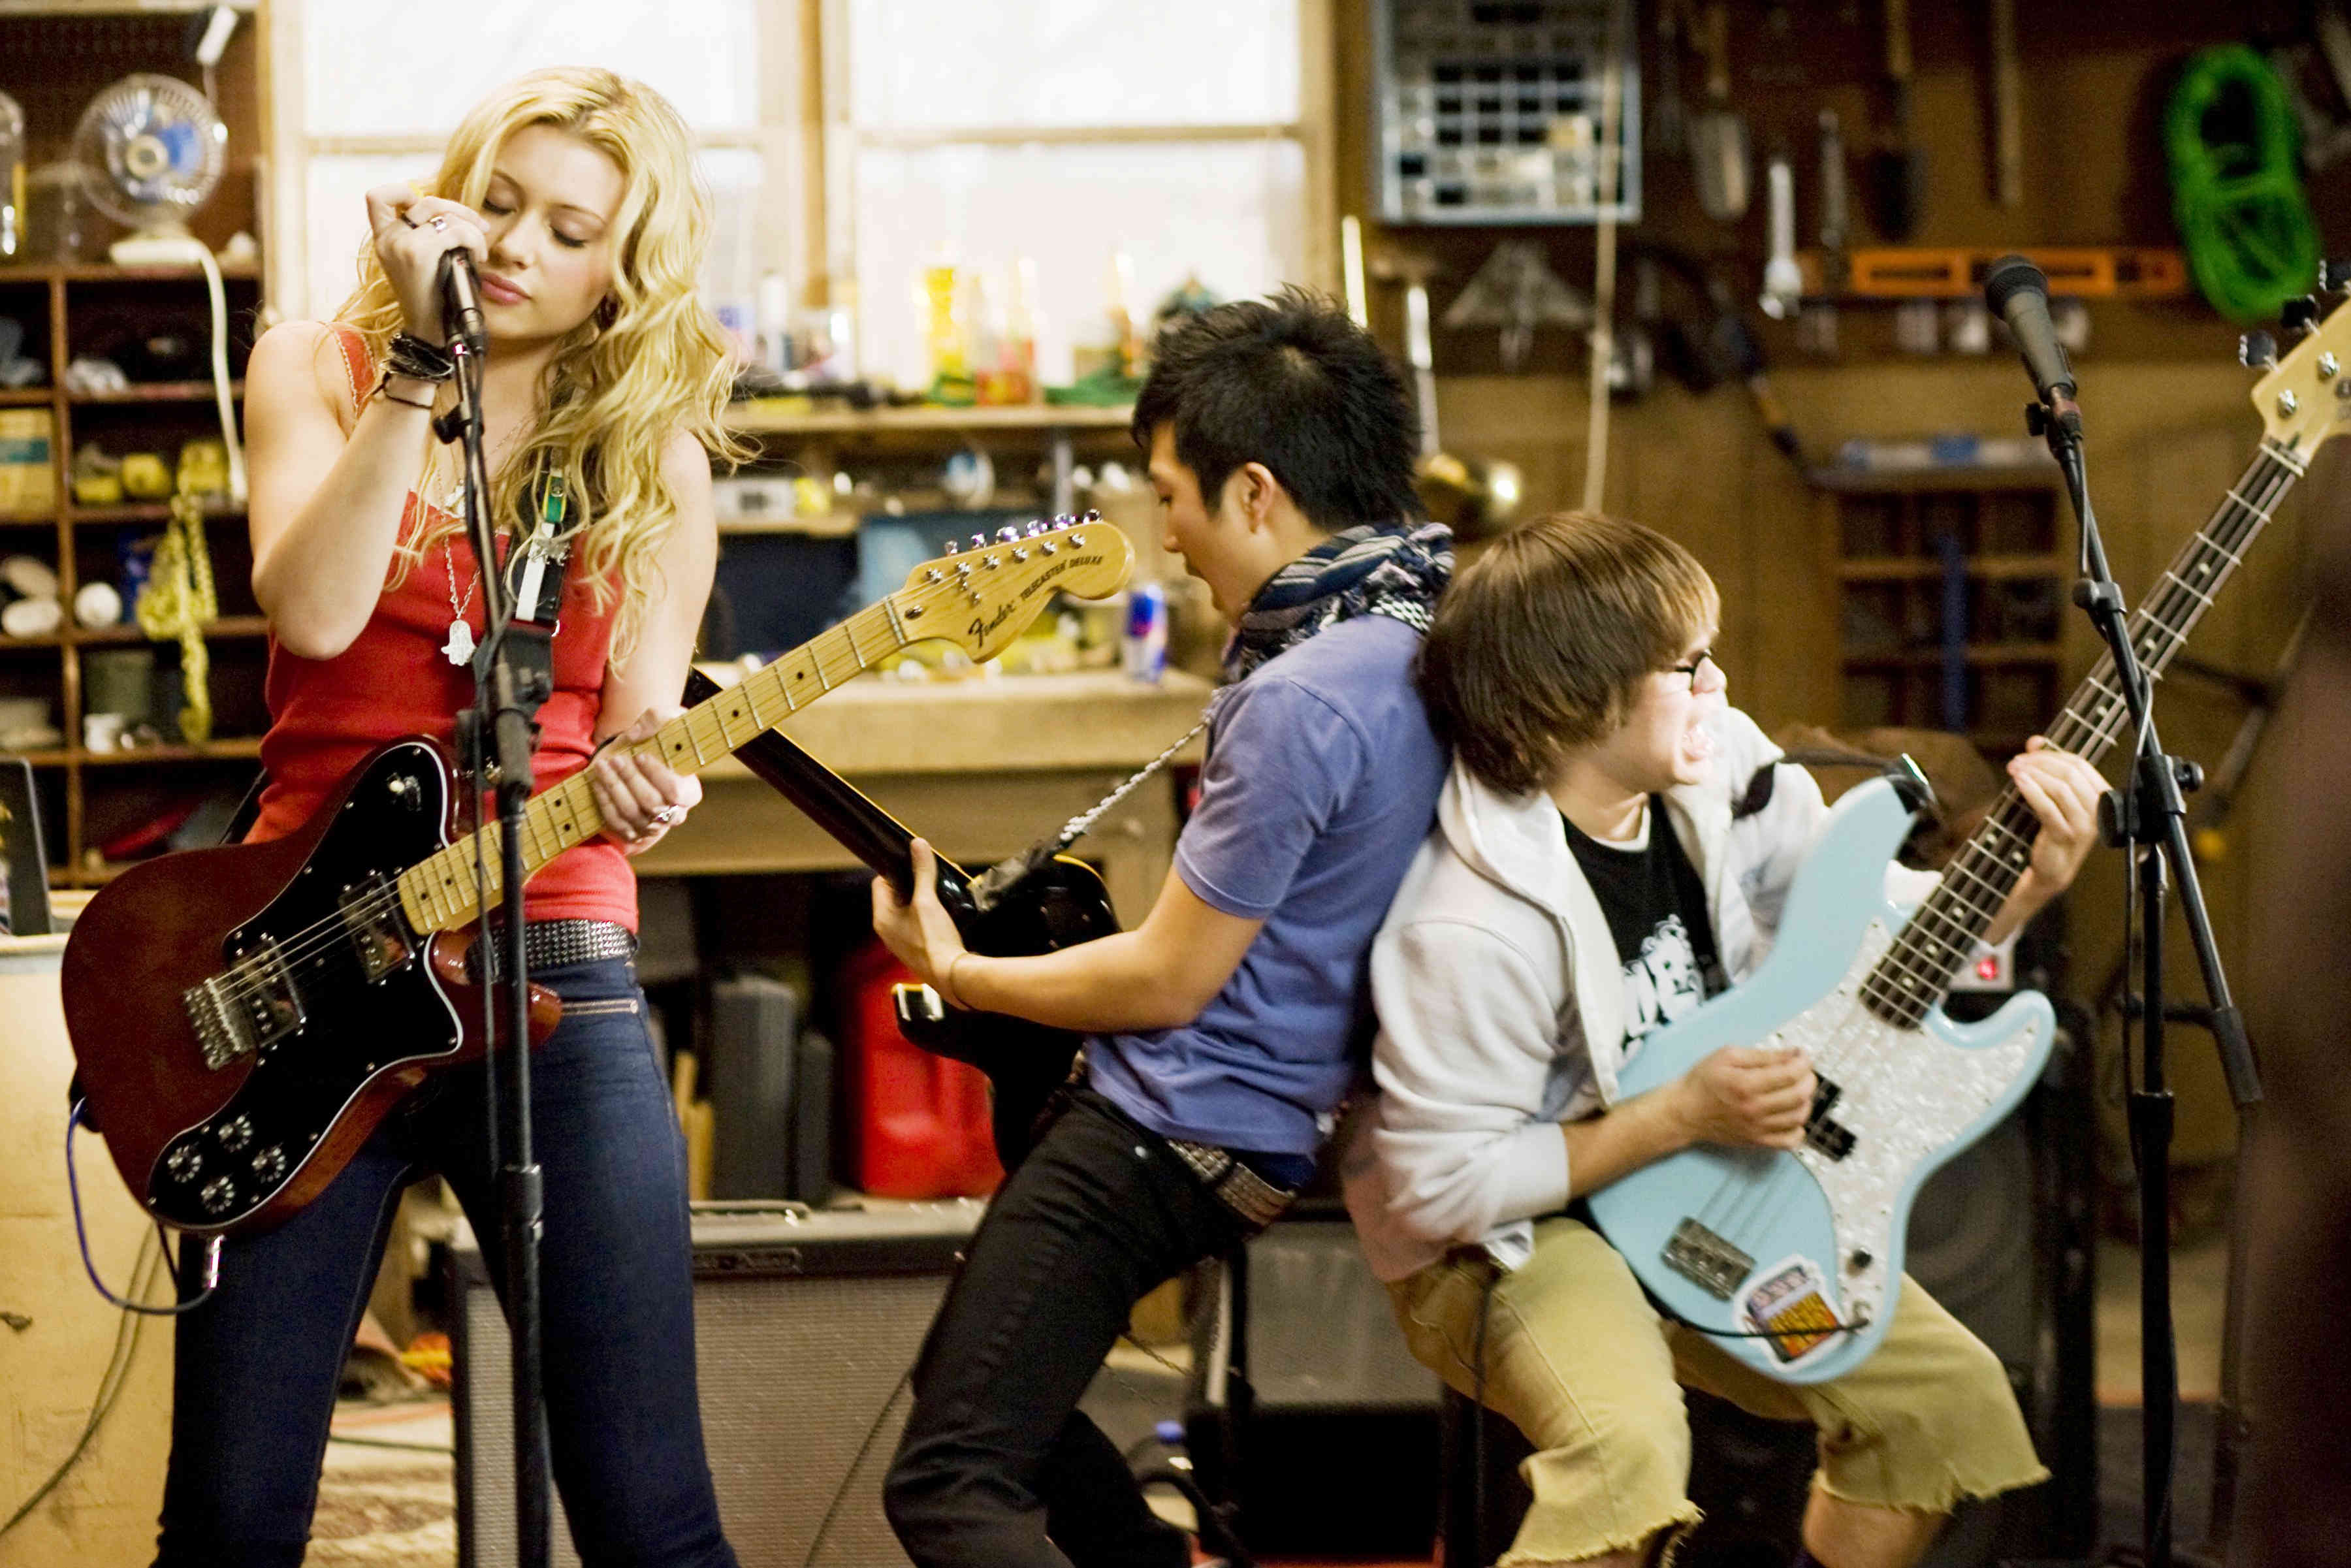 Alyson Michalka, Tim Jo and Charlie Saxton in Summit Entertainment's Bandslam (2009)